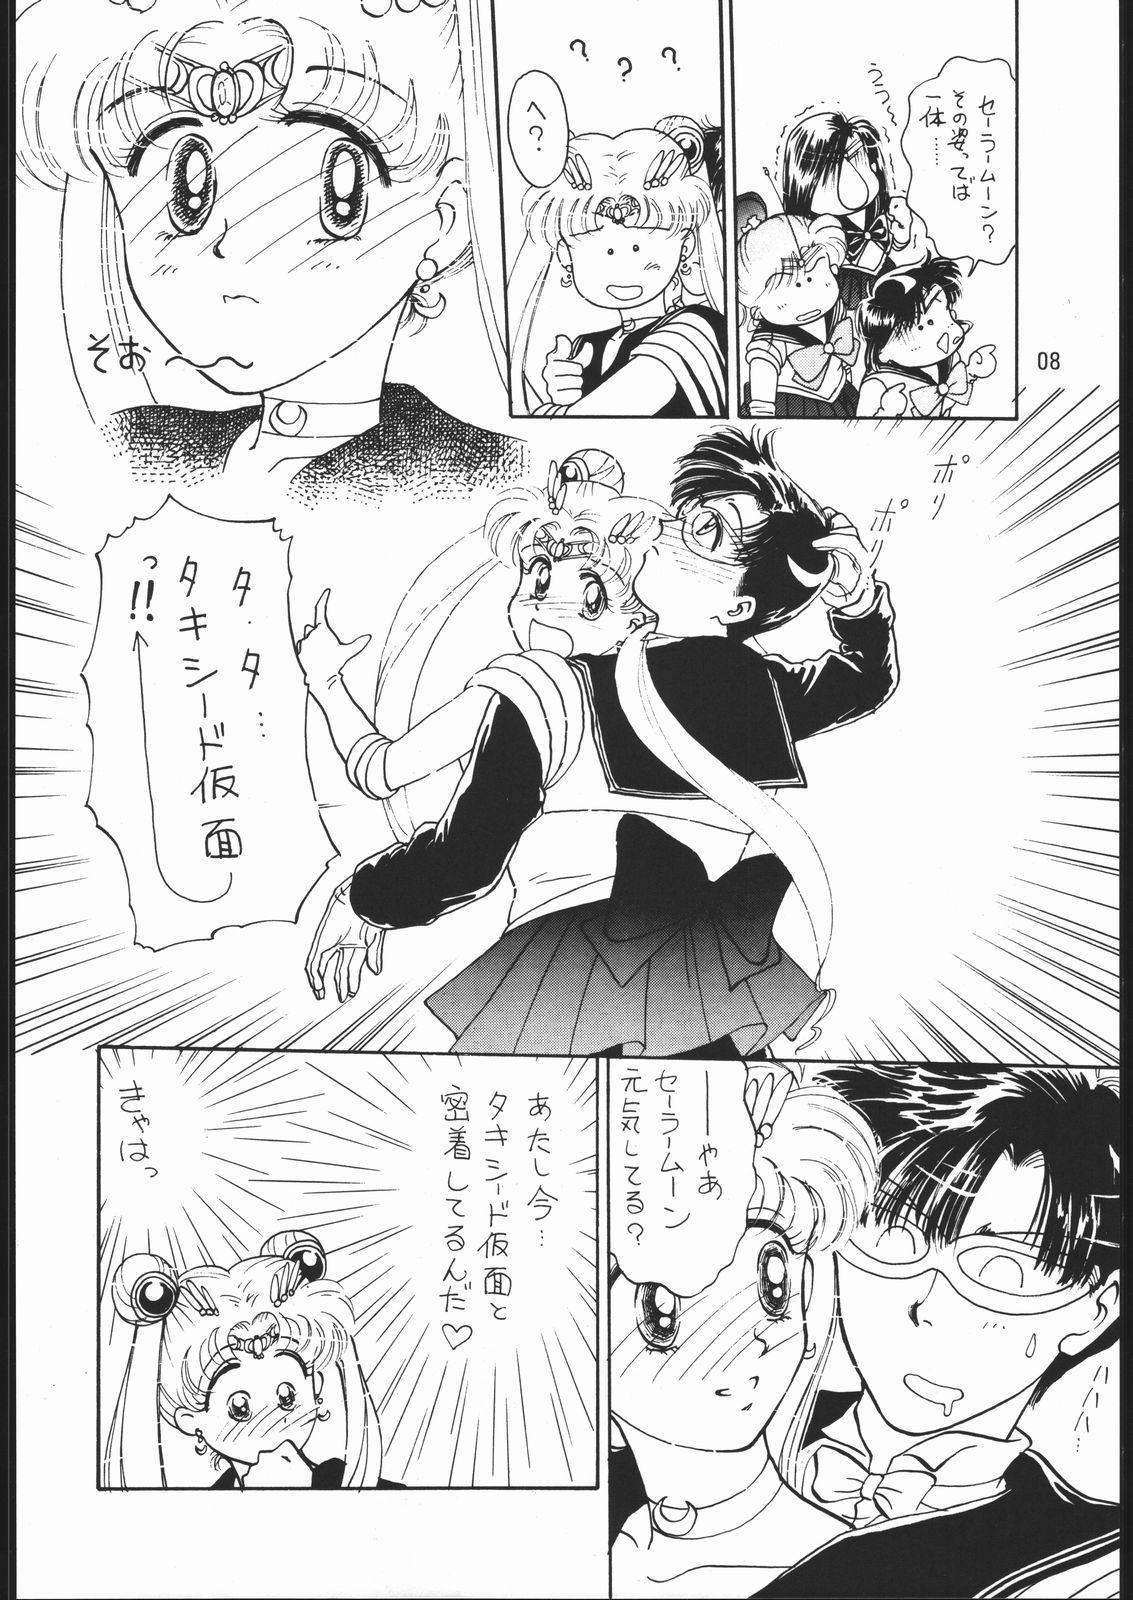 Thuylinh うさぎがピョン!! - Sailor moon Eating Pussy - Page 7